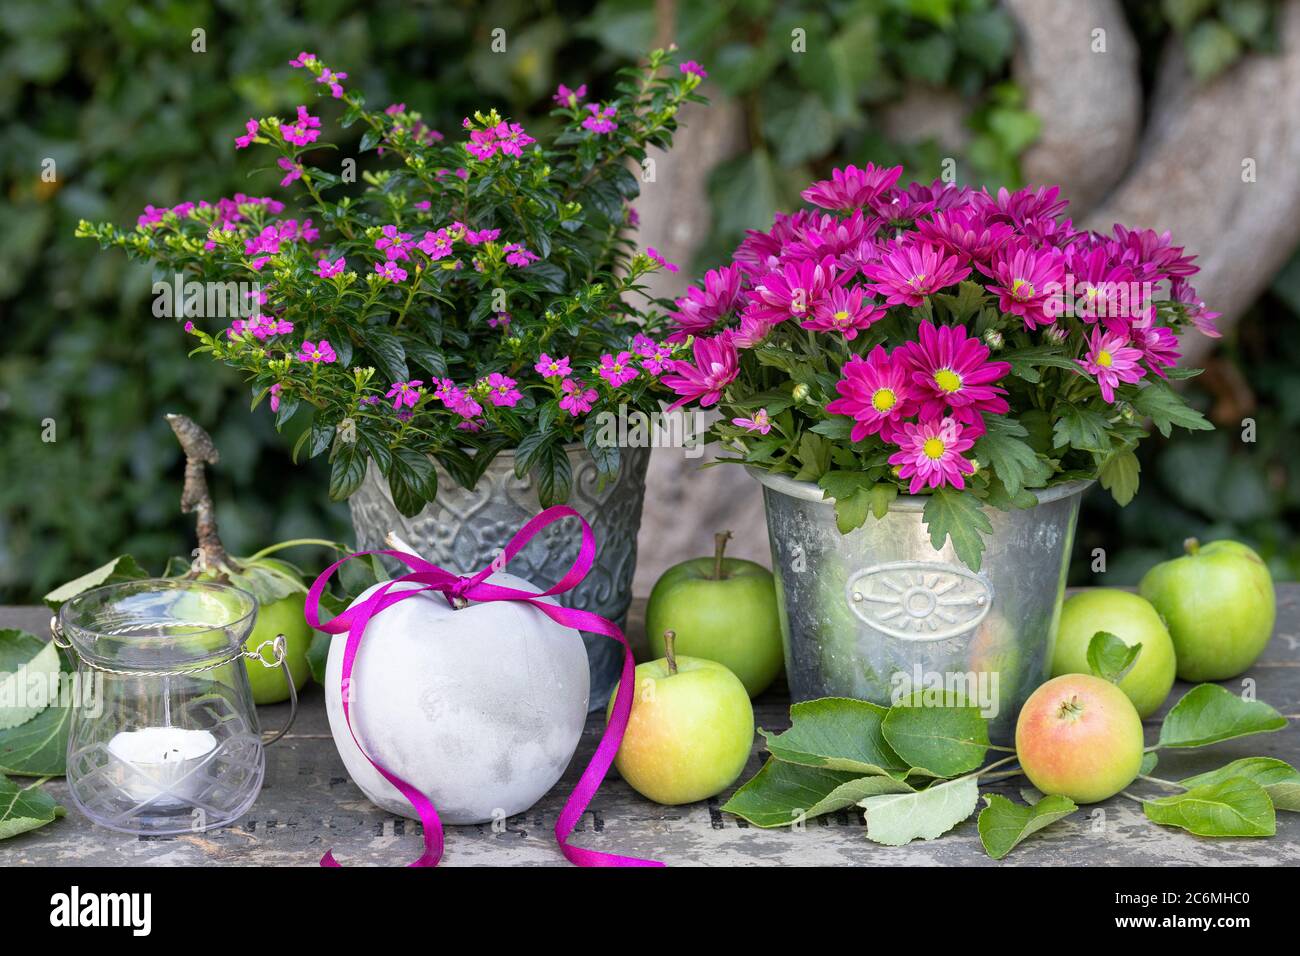 autumn garden decoration with apples and pink flowers Stock Photo